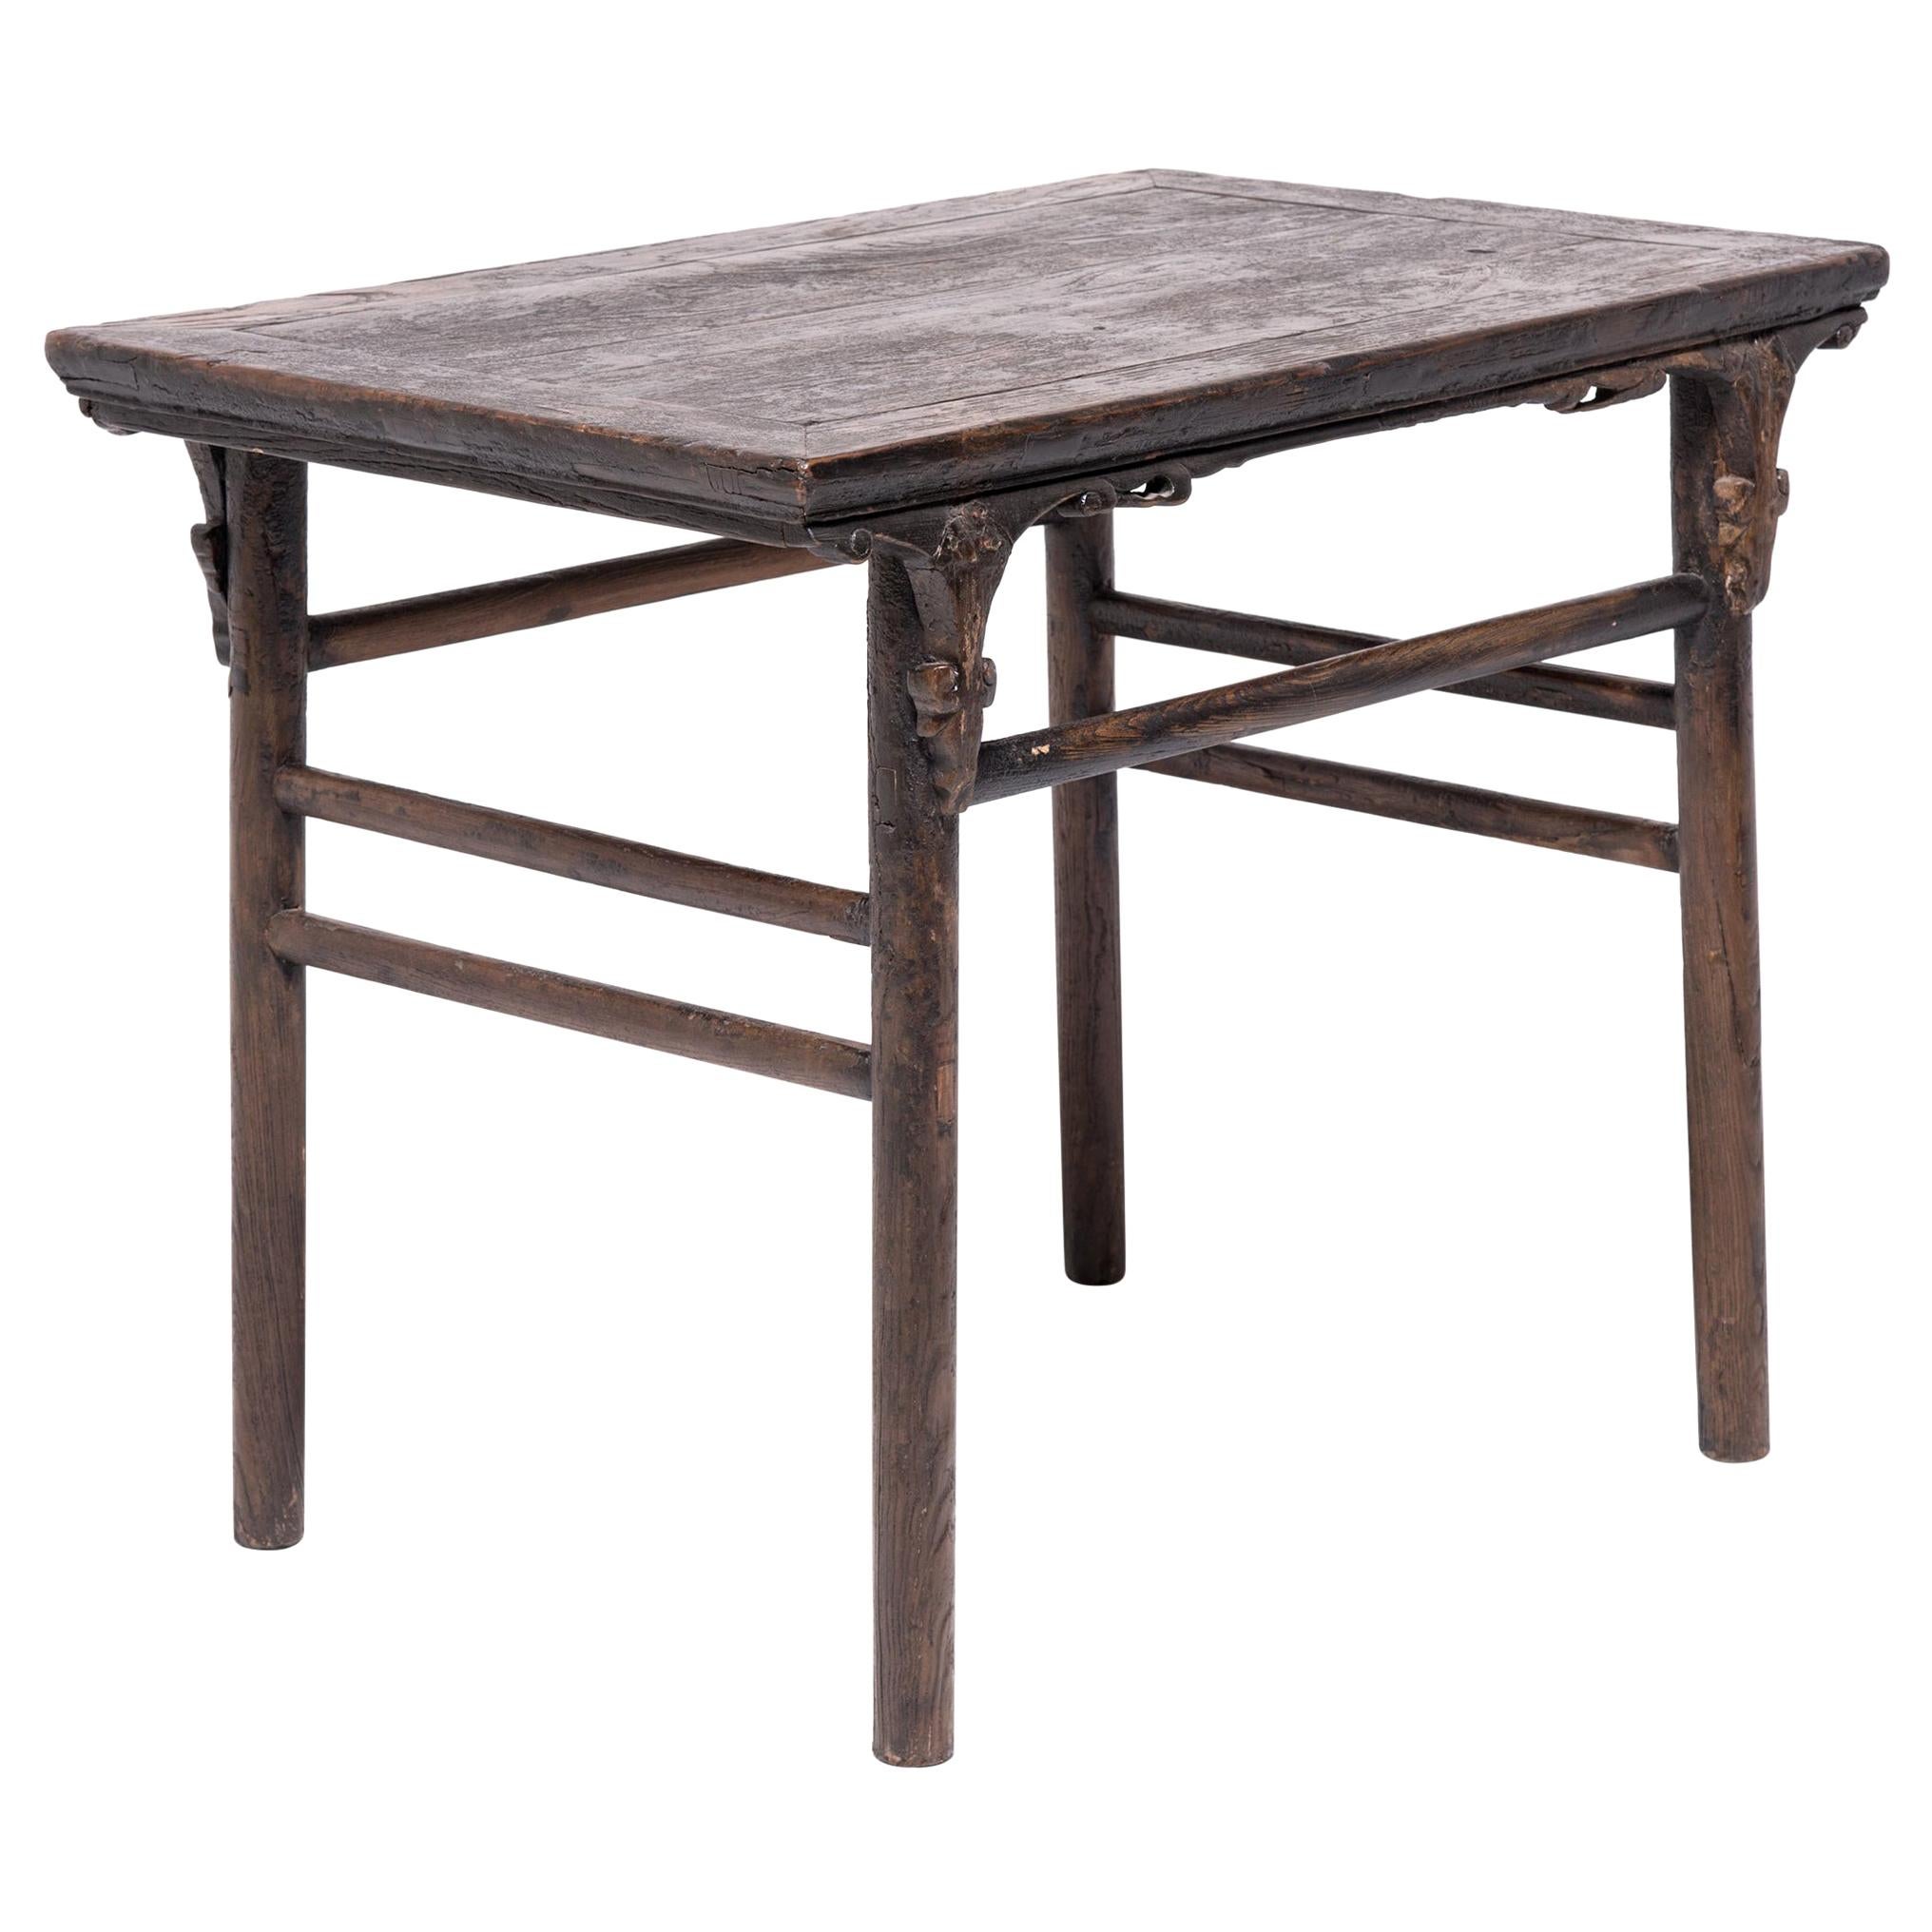 Chinese Ruyi Wine Table, c. 1800 For Sale